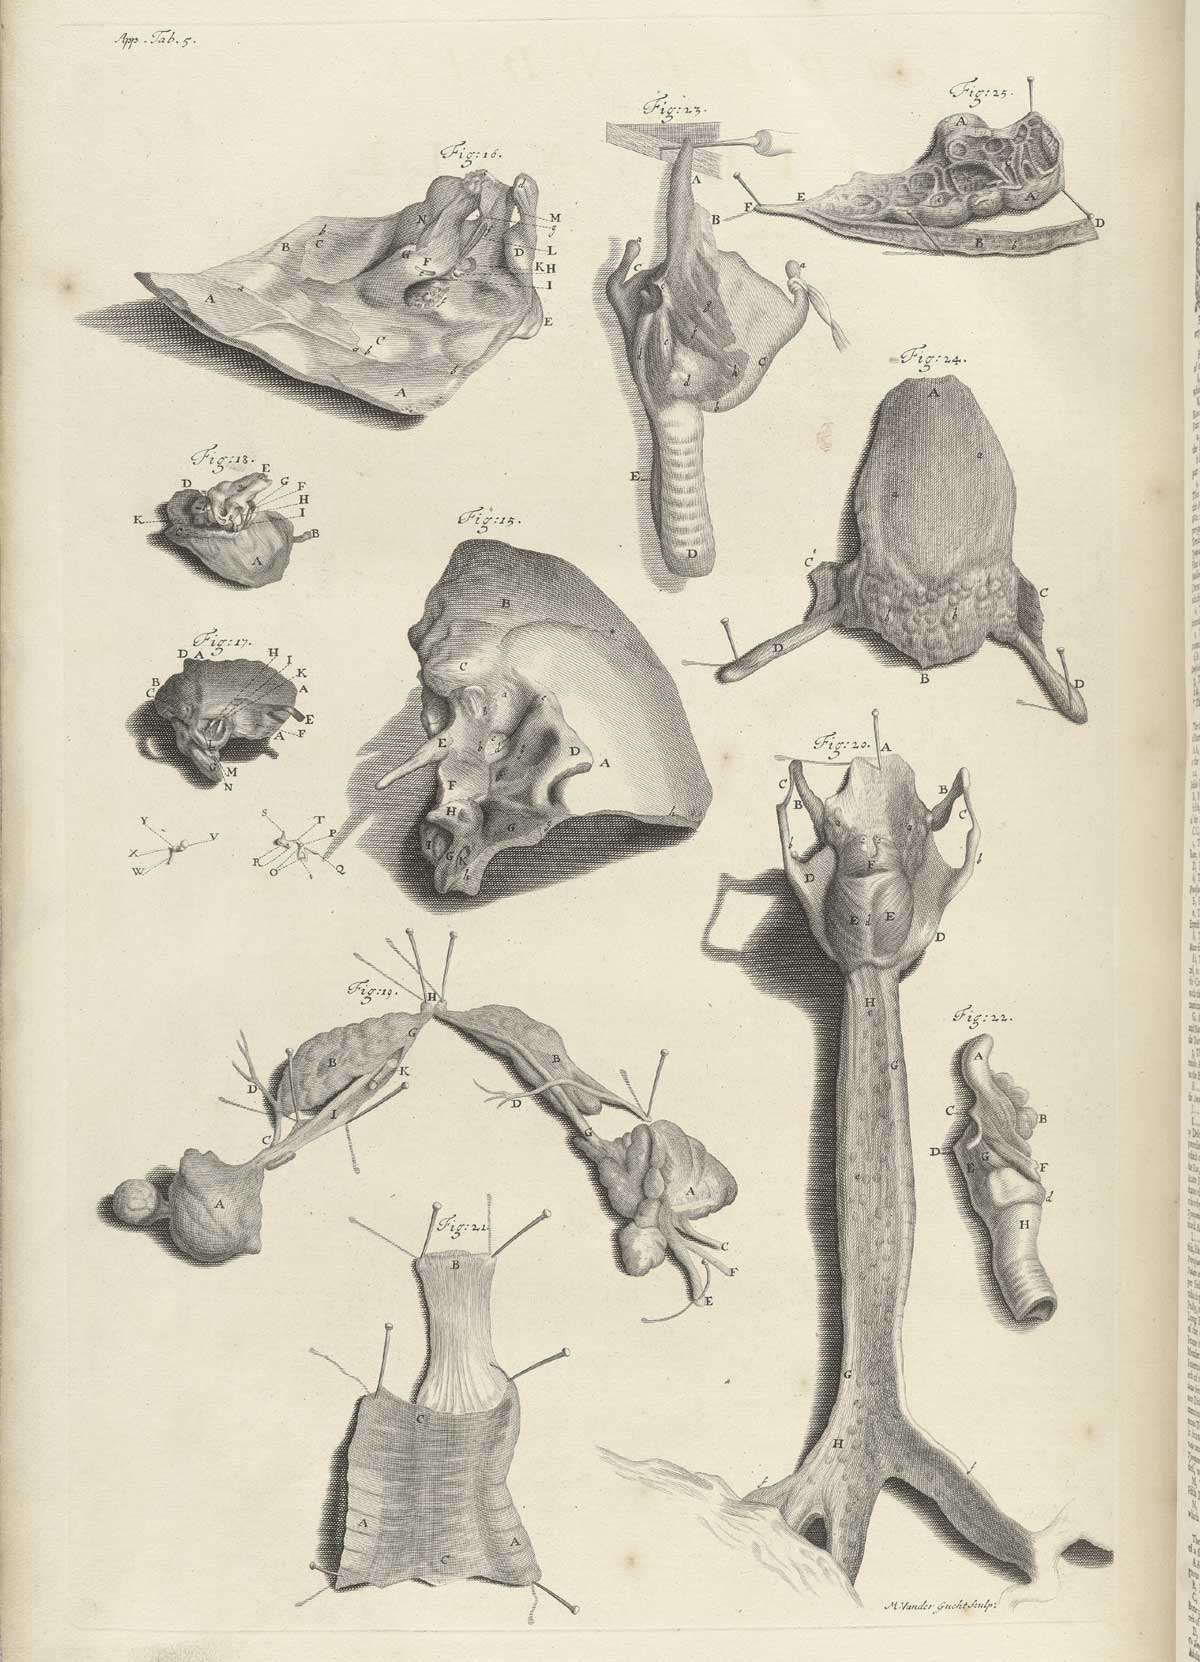 Engraving showing 12 figures of dissections of the organs of speech and of hearing; the four figures in the upper left corner are the bones and structures of the ear and the temporal bone of the skull; at the bottom of the page and at the center of the top of the page are the organs of speech, including the larynx, windpipe, and even the salivary glands; from William Cowper’s Anatomy of the humane bodies, NLM Call no.: WZ 250 C876a 1698.